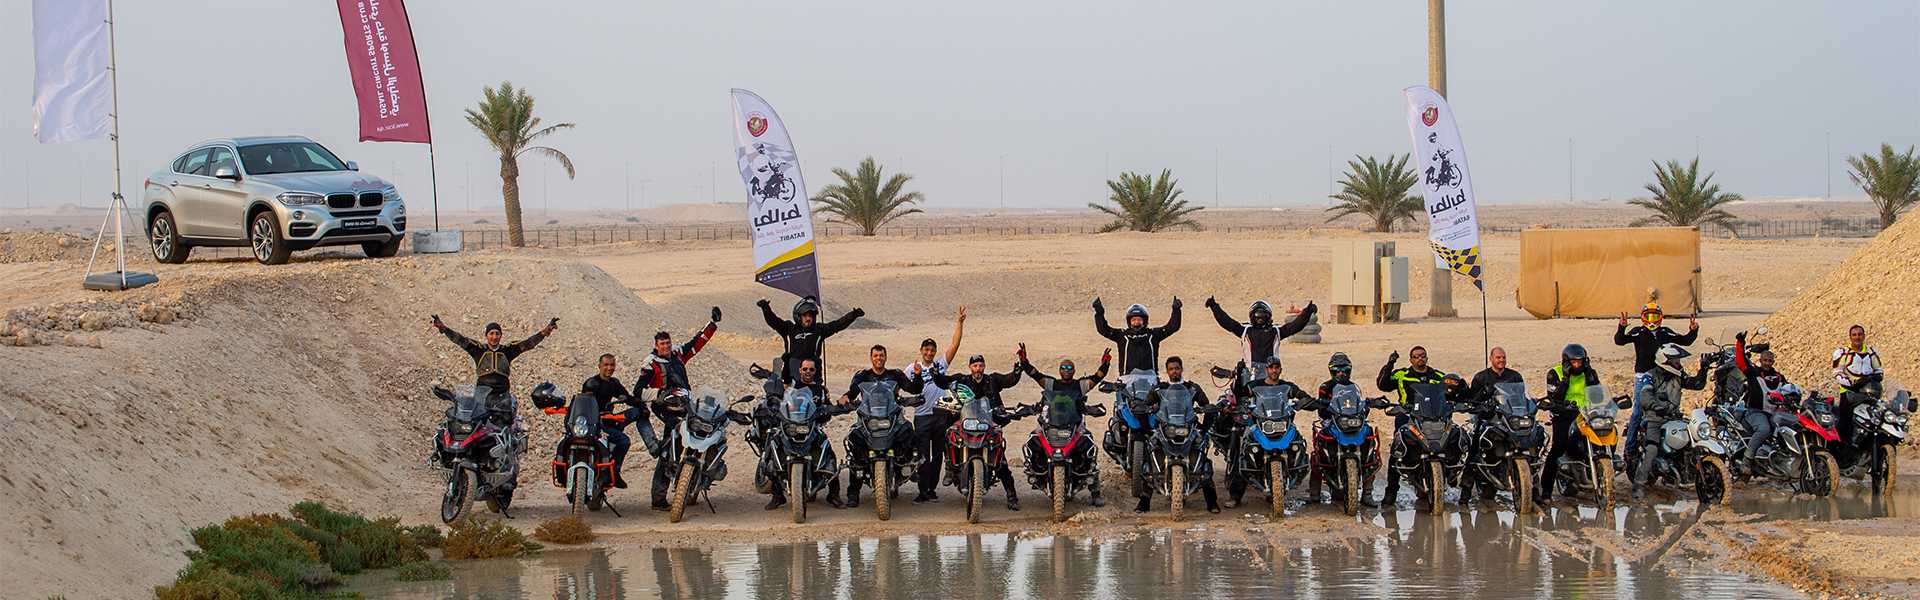 LCSC organises an Adventure Off-Road Training event in collaboration with Alfardan Motorcycles and Batabit Qatar Center